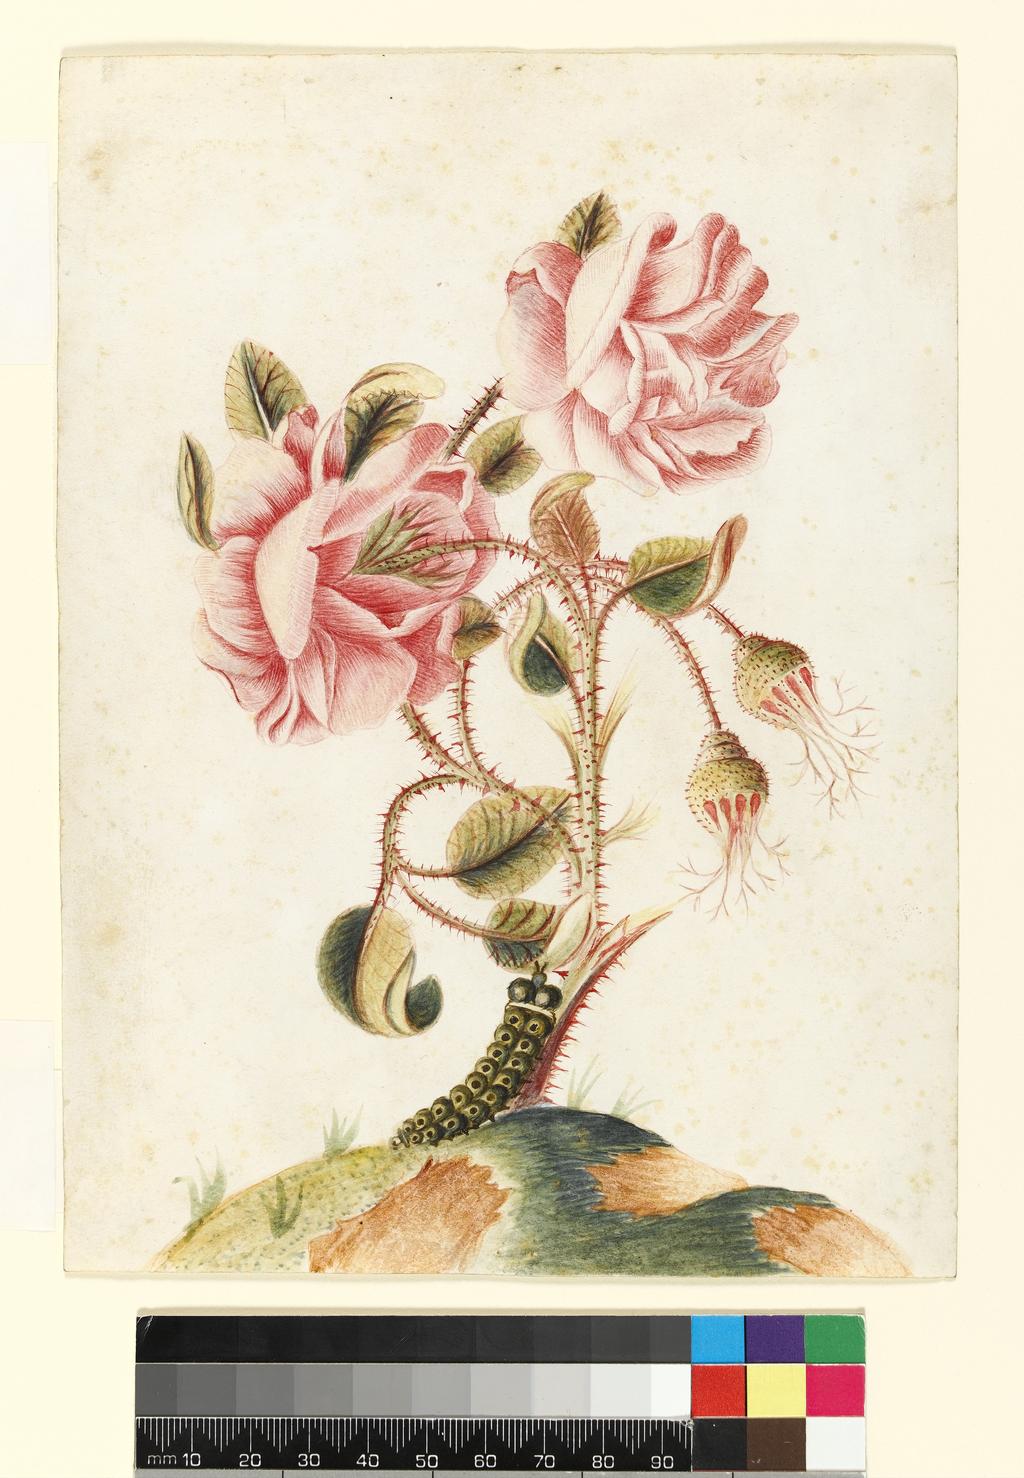 An image of Title/s: Roses in bloom and in bud with a caterpillar crawling up the stem Maker/s: Unknown (draughtsman) School/Style: ItalianTechnique Description: watercolour on vellum Dimensions: height: 207 mm, width: 152 mm Date: circa 1750